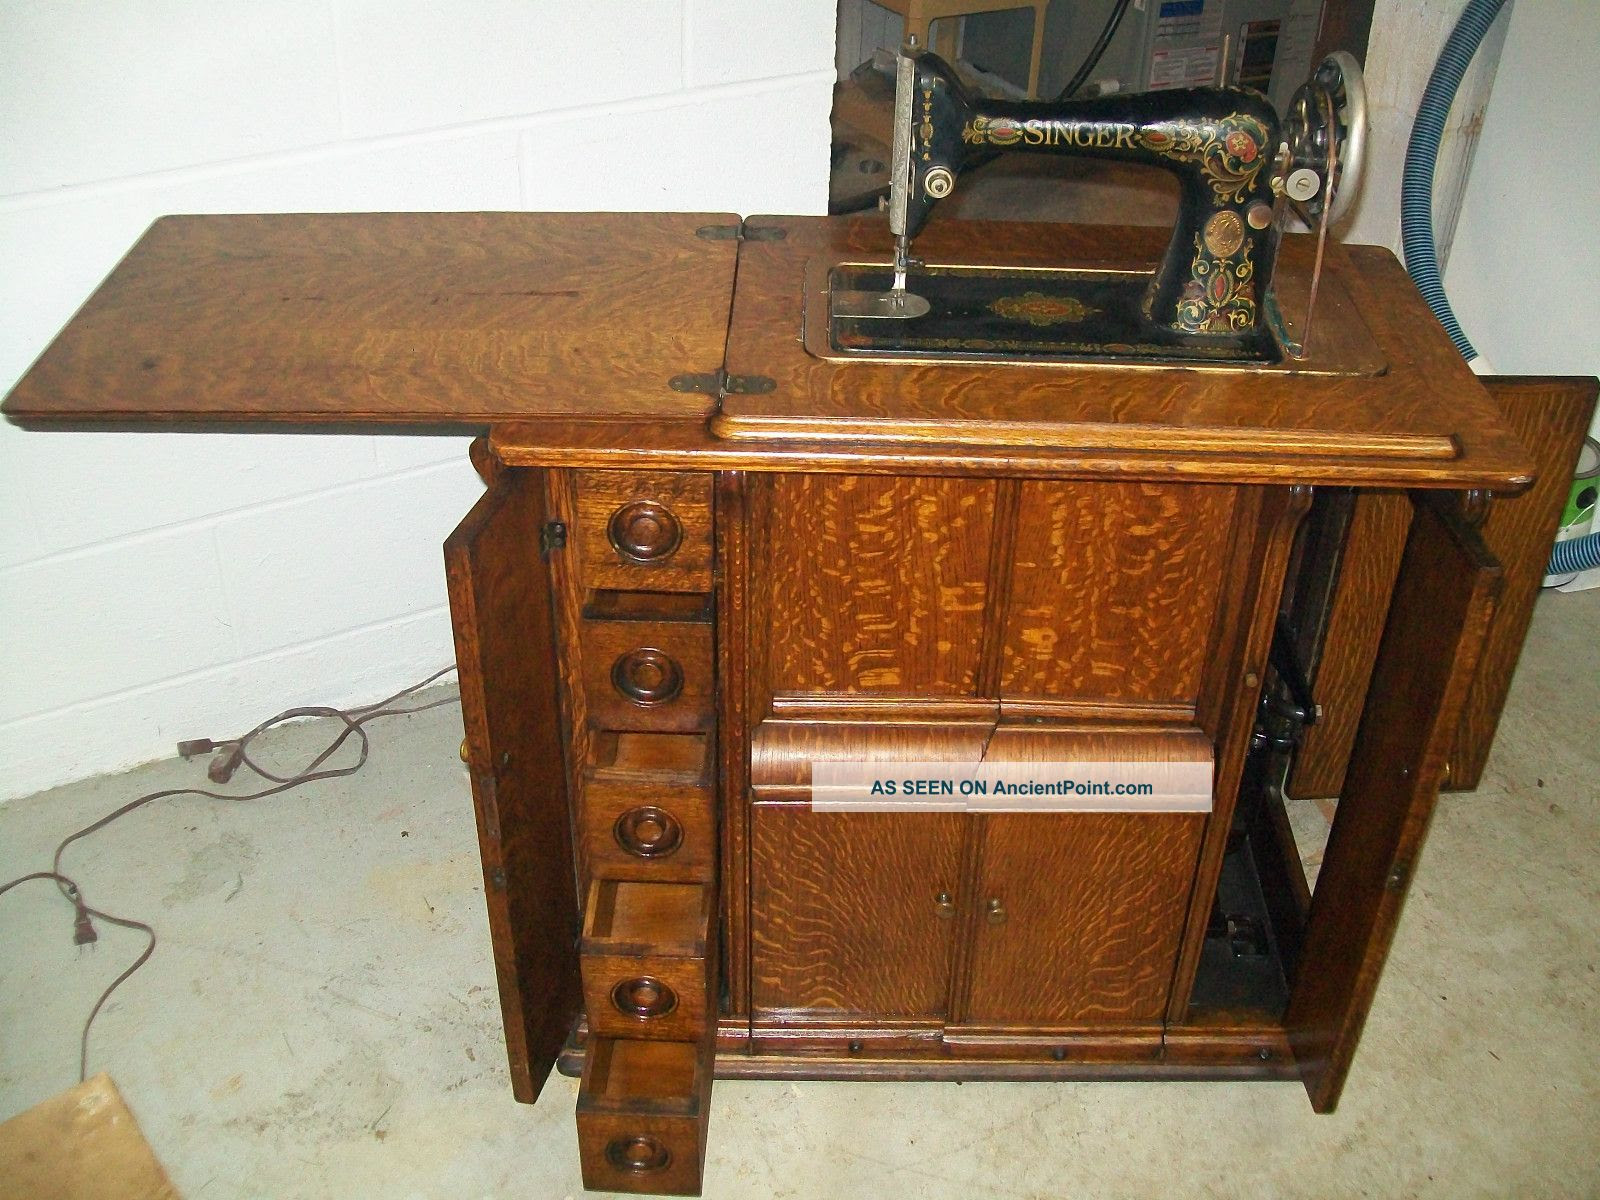 Antique Sewing Machine Cabinets Design For Home